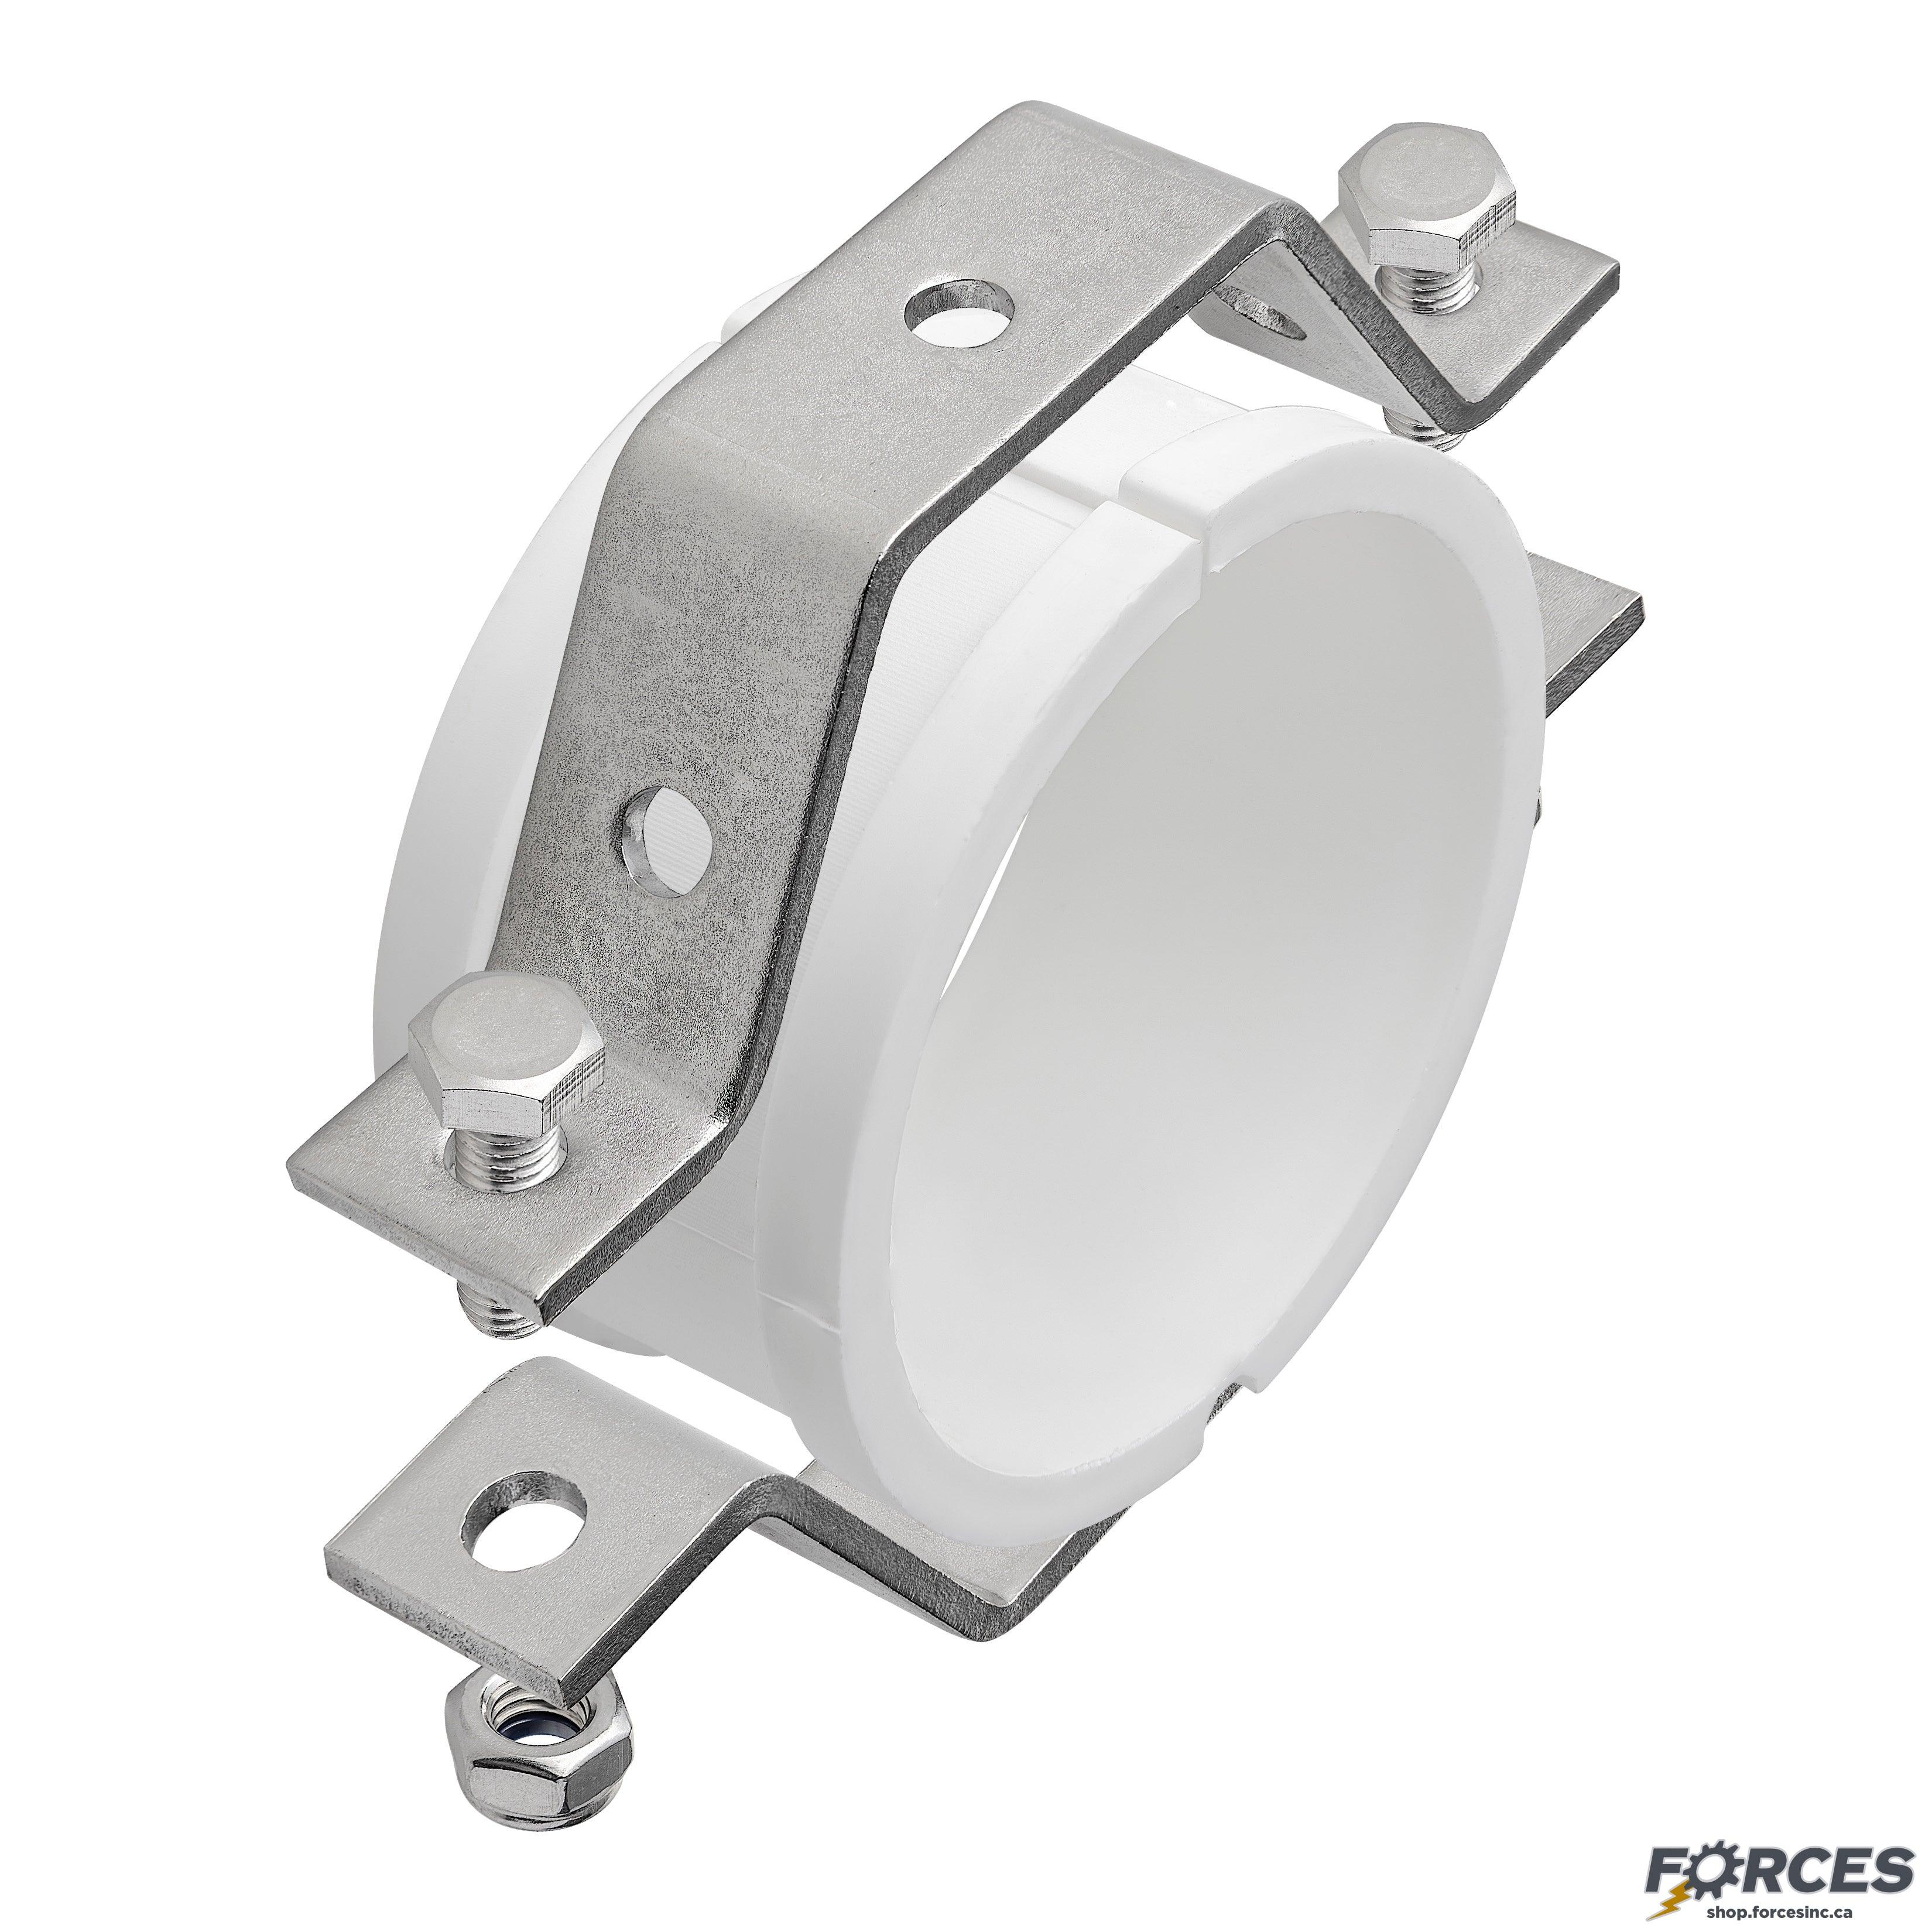 4" Hanger for Sanitary Tube With PVC Insert 304 Stainless Steel - Forces Inc